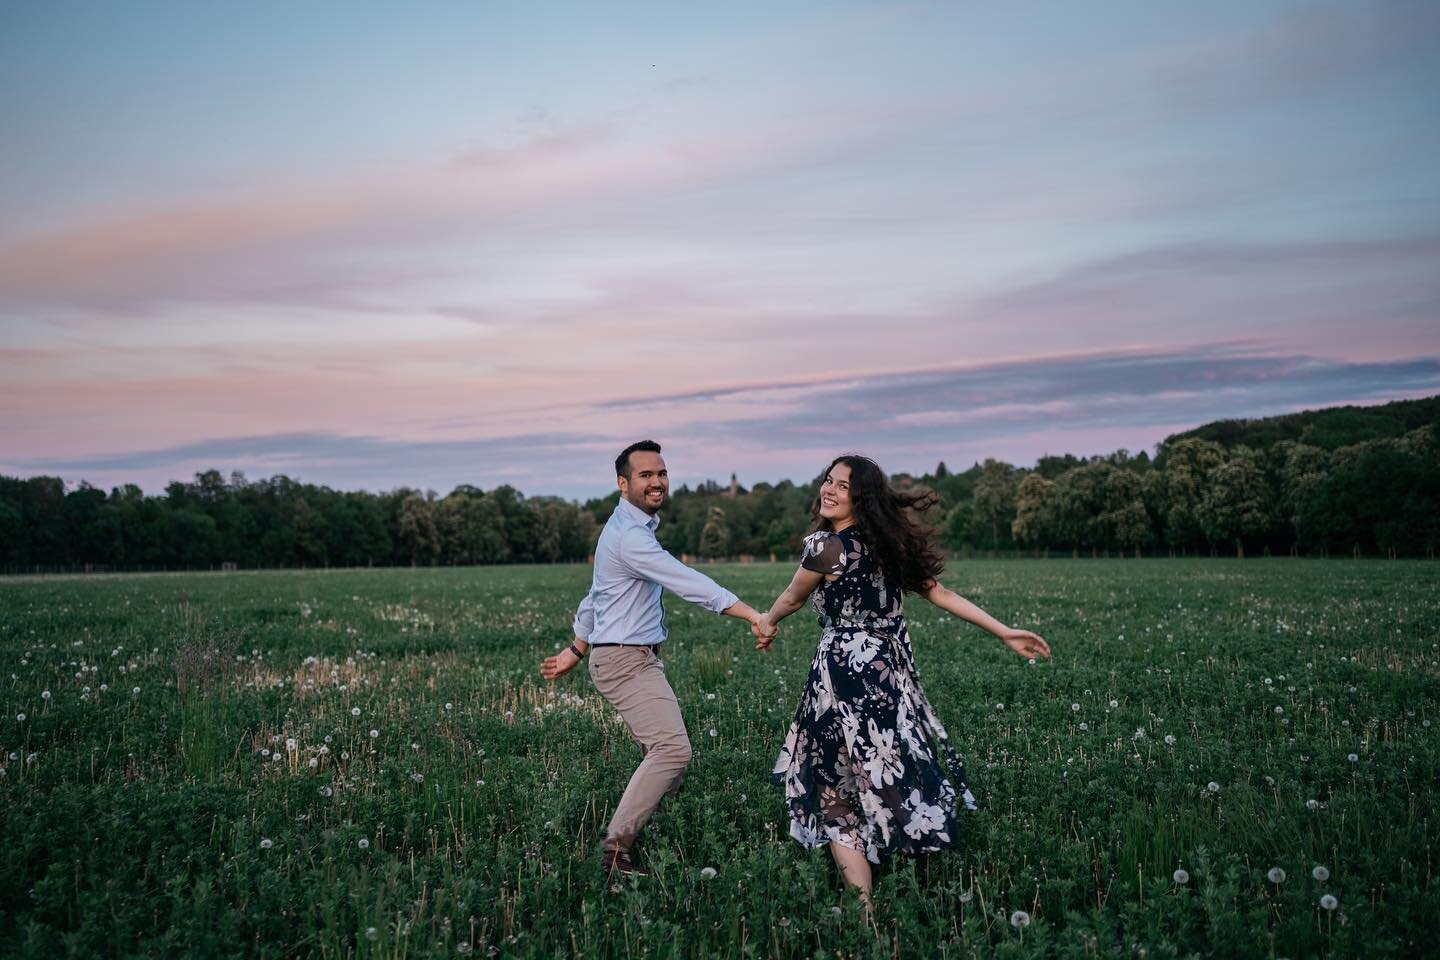 That's what looking forward to marrying your soul mate should feel like! 🤩😍
@sean_wisse &amp; @wisse_emilie 
.
.
.
#ataleofhearts #weddingphotographervienna #viennaweddingphotographer #engagementphotoshoot #couplephotoshoot #couplephotography #love